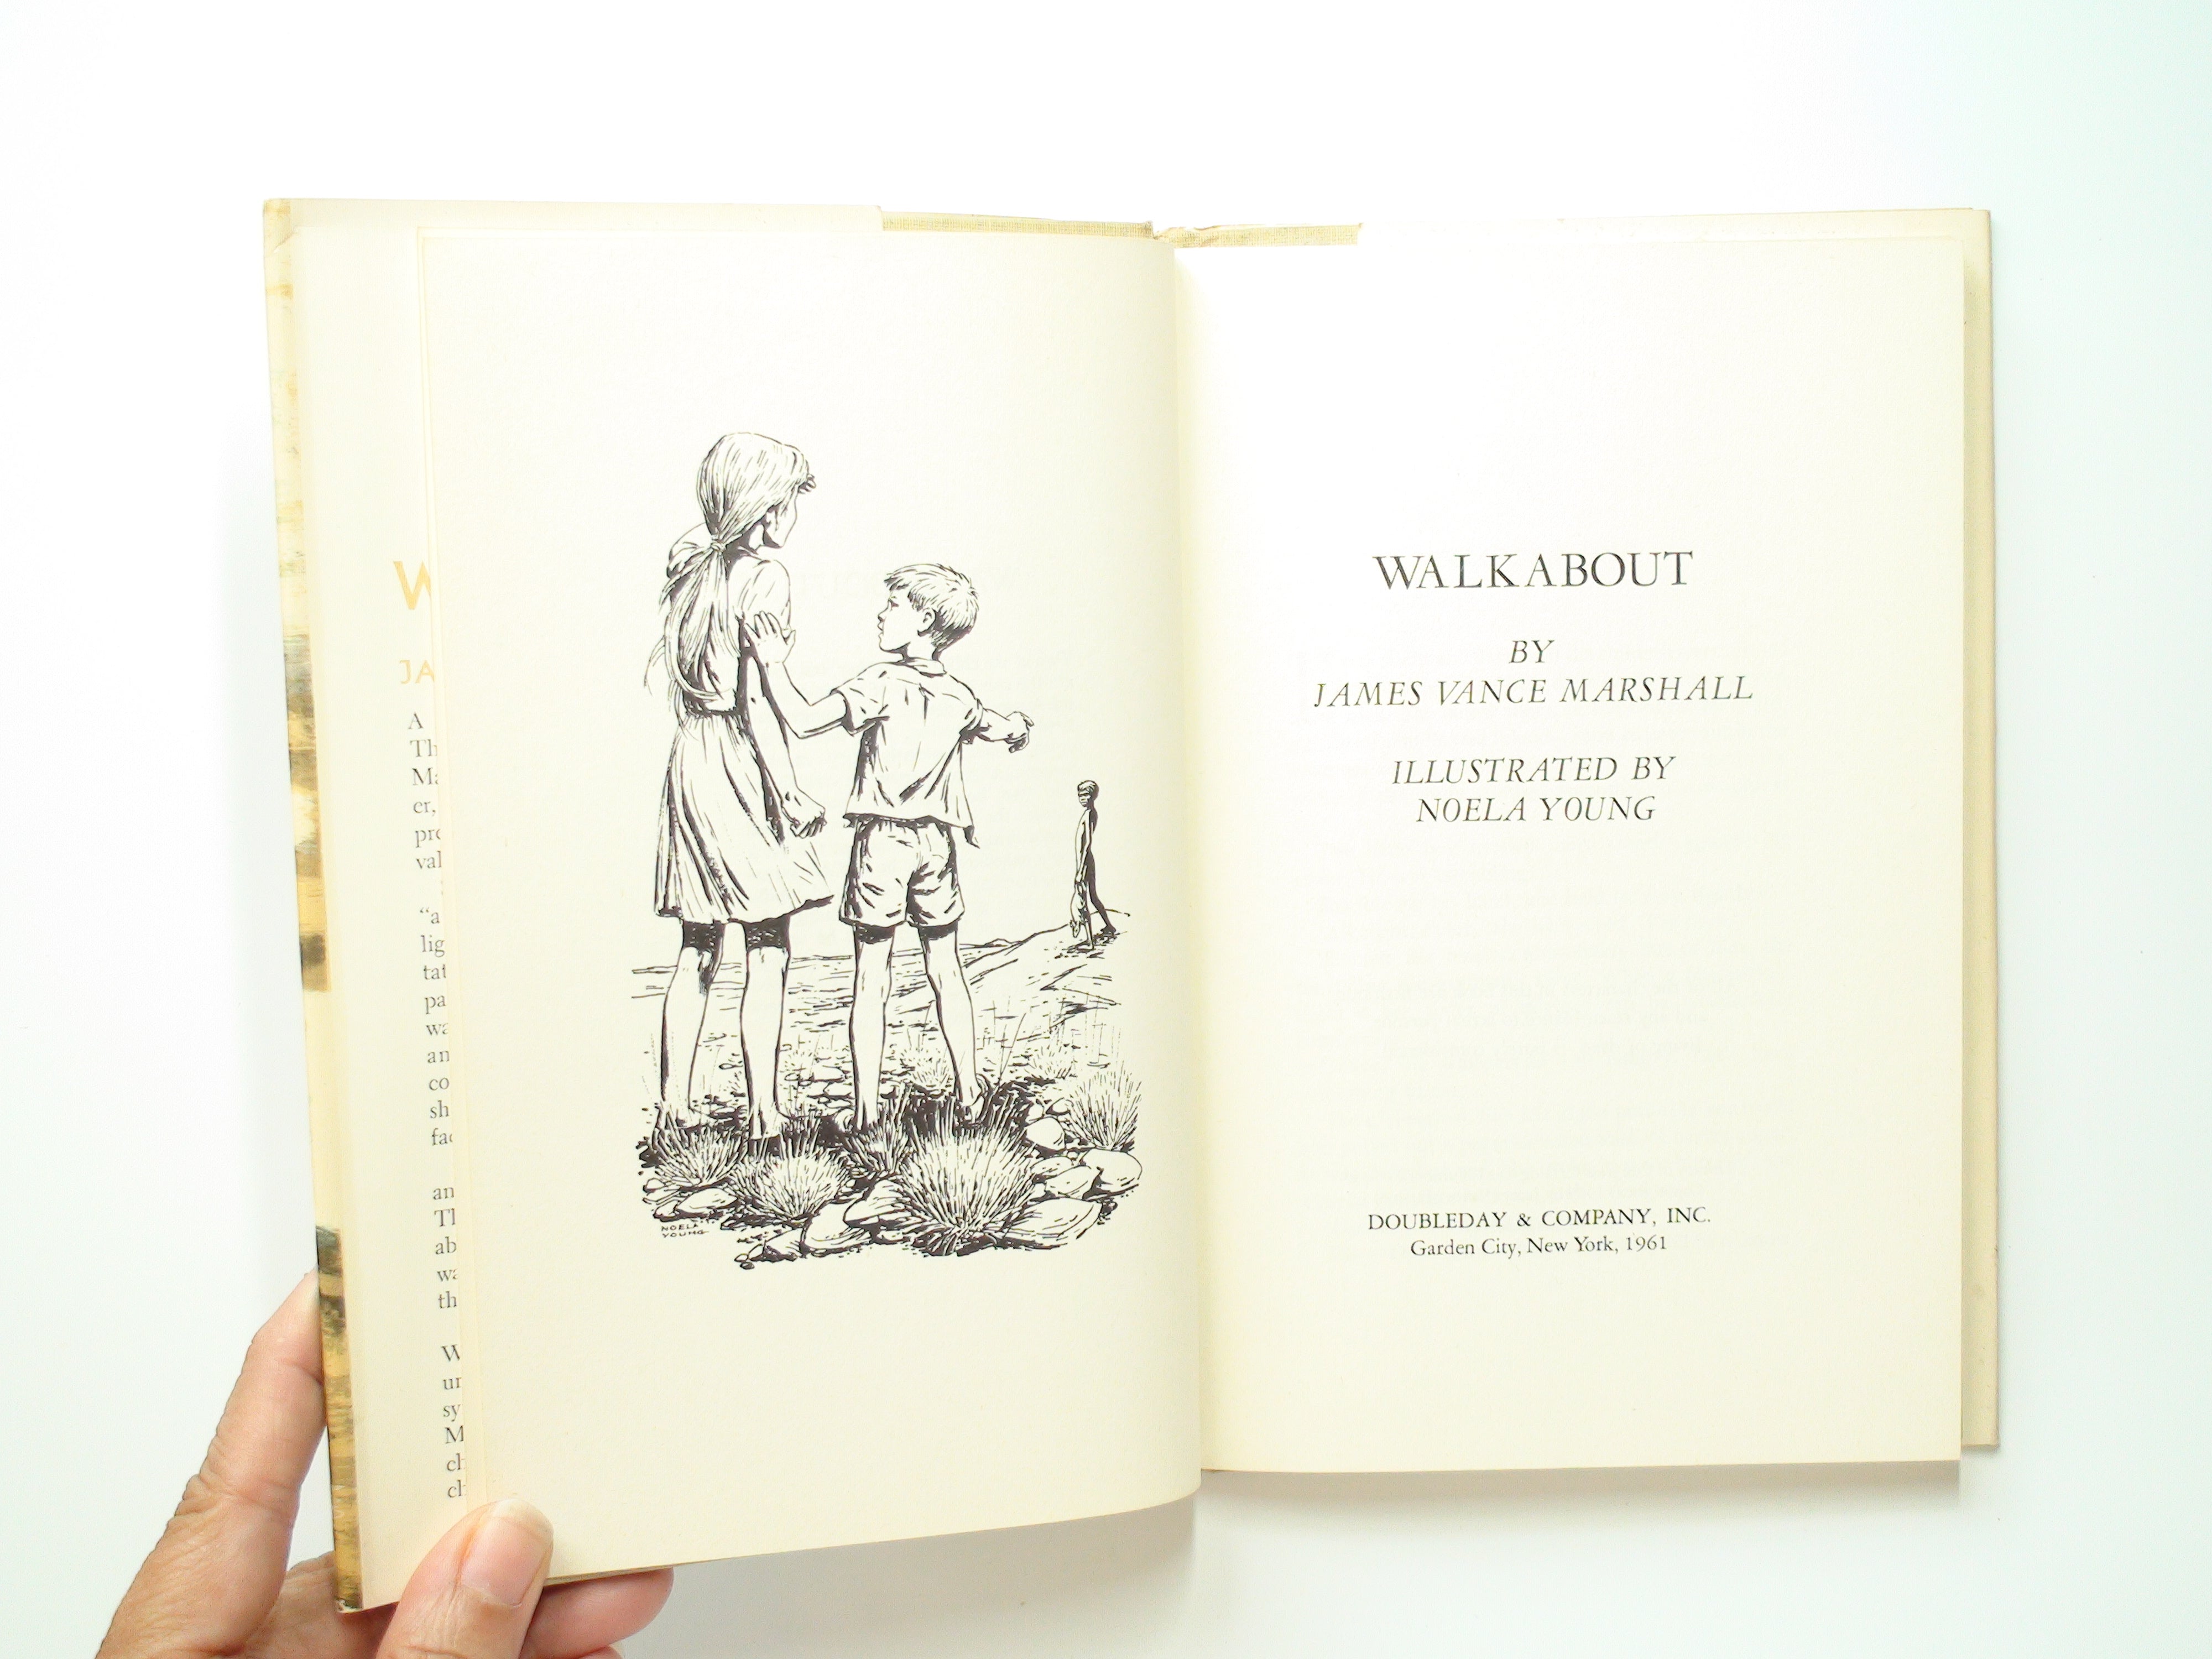 Walkabout by James Vance Marshall, Illustrated by Noela Young, with D/J, 1961